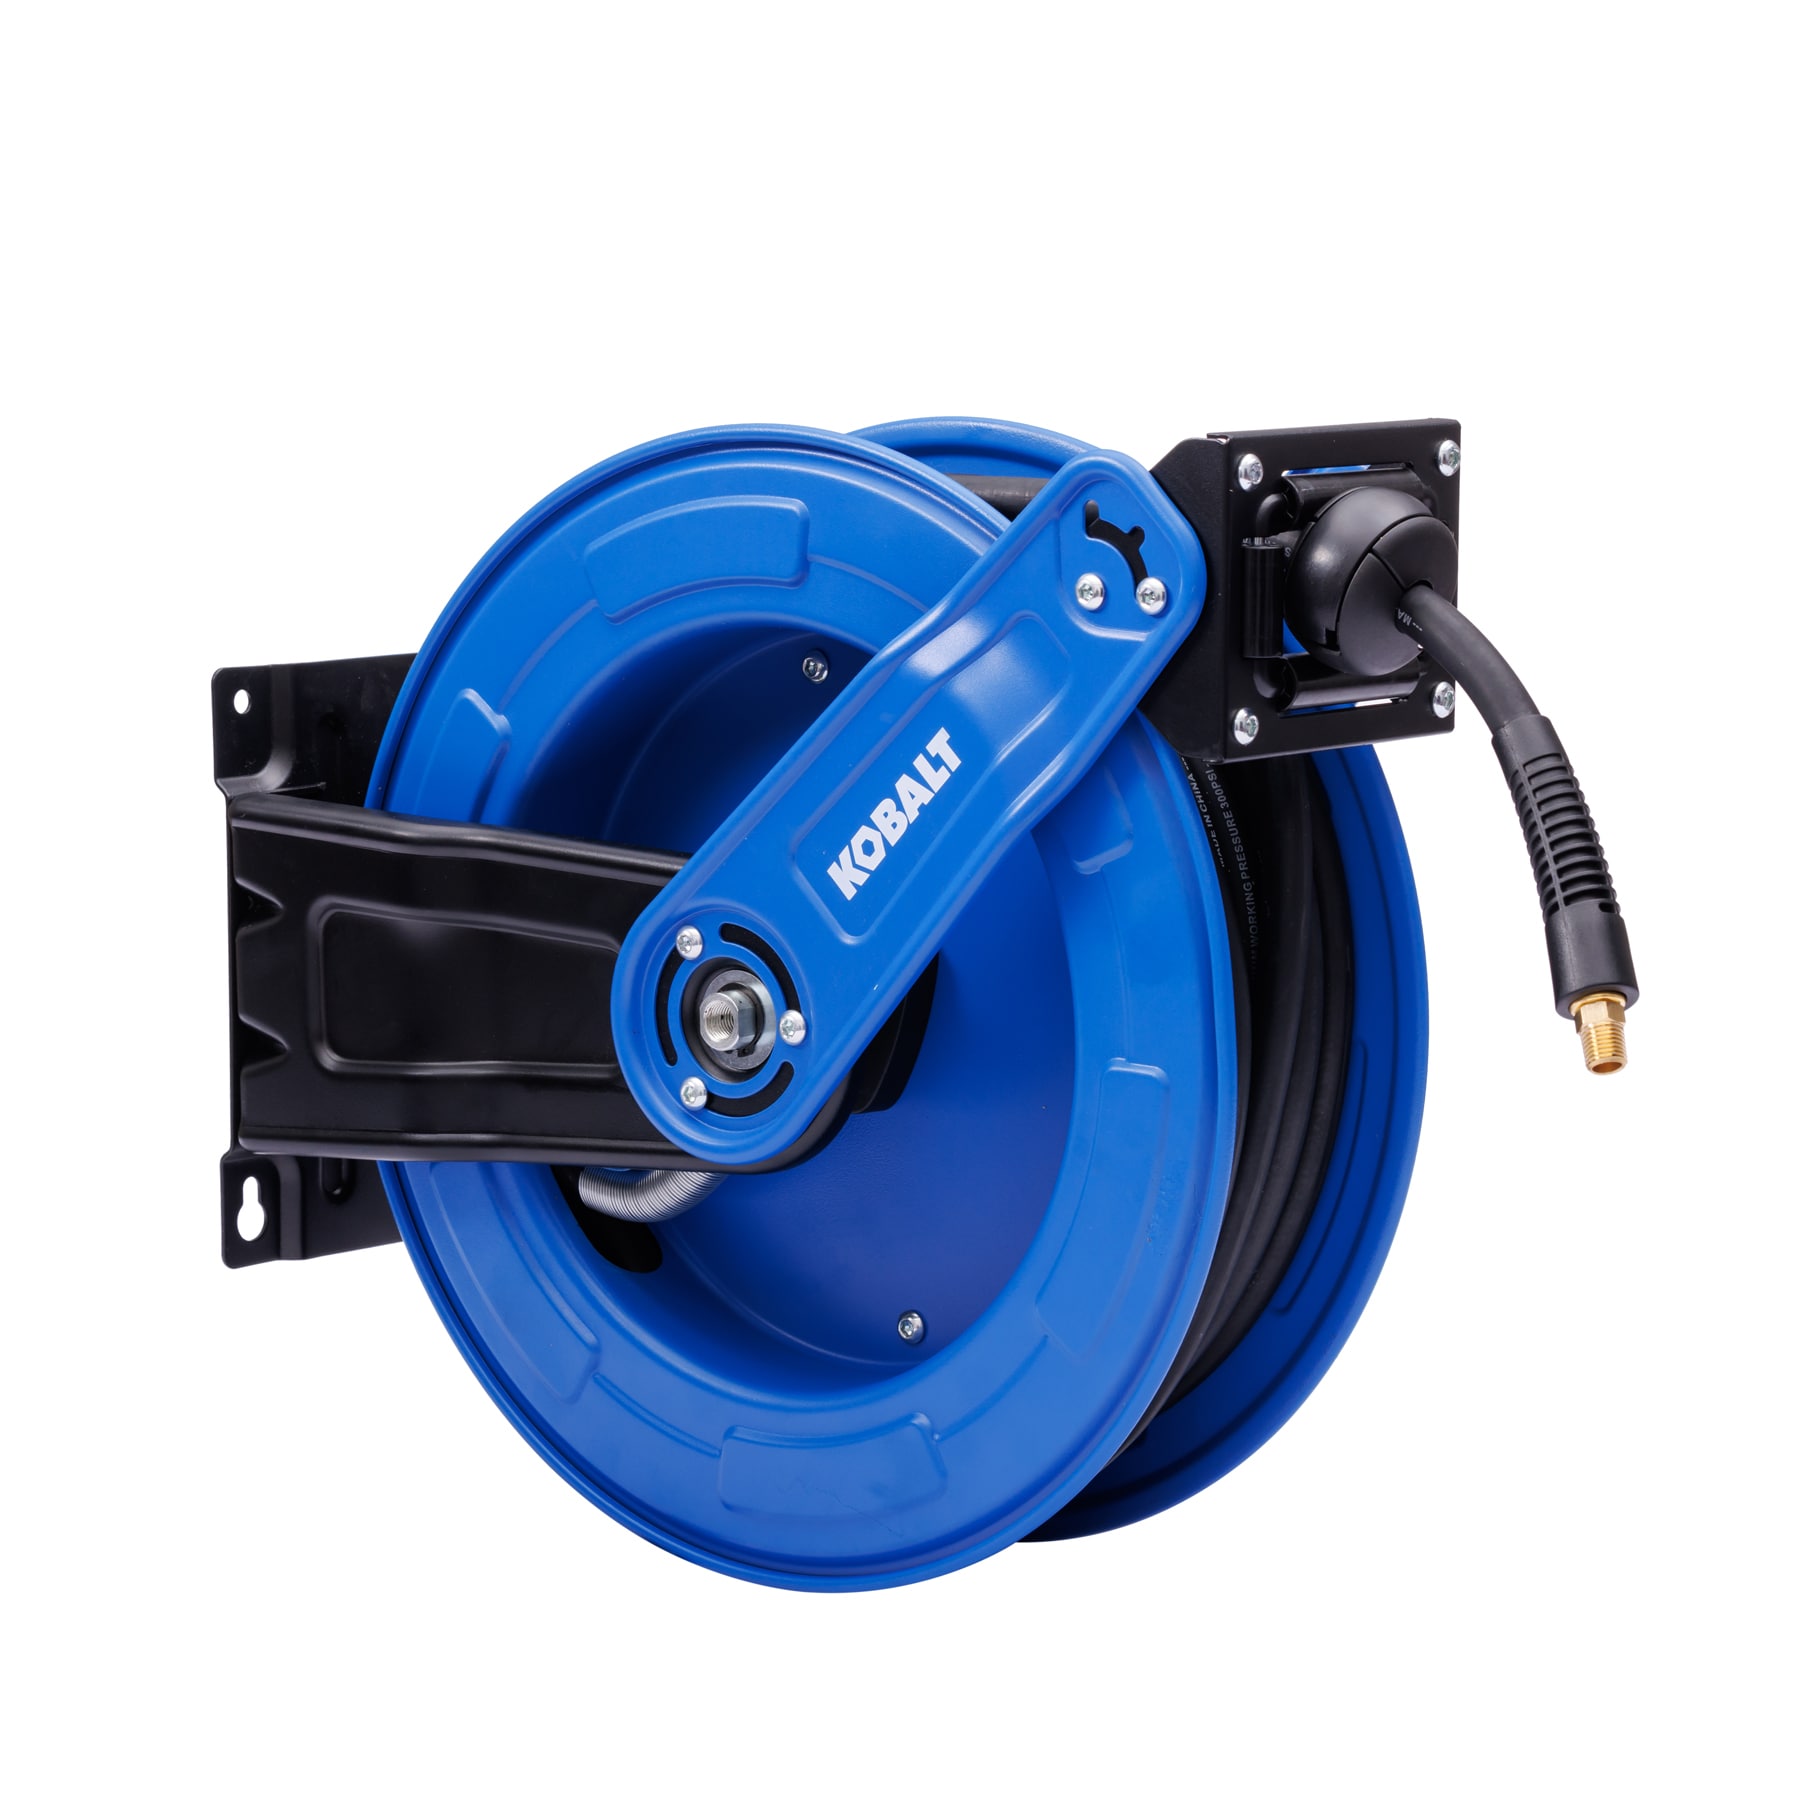 VEVOR Retractable Air Hose Reel, Hybrid Air Hose Max 300Psi, Air Compressor  Hose Reel with 5 In Lead In, Ceiling Wall Mount Heavy Duty Double Arm Steel  Reel in the Air Compressor